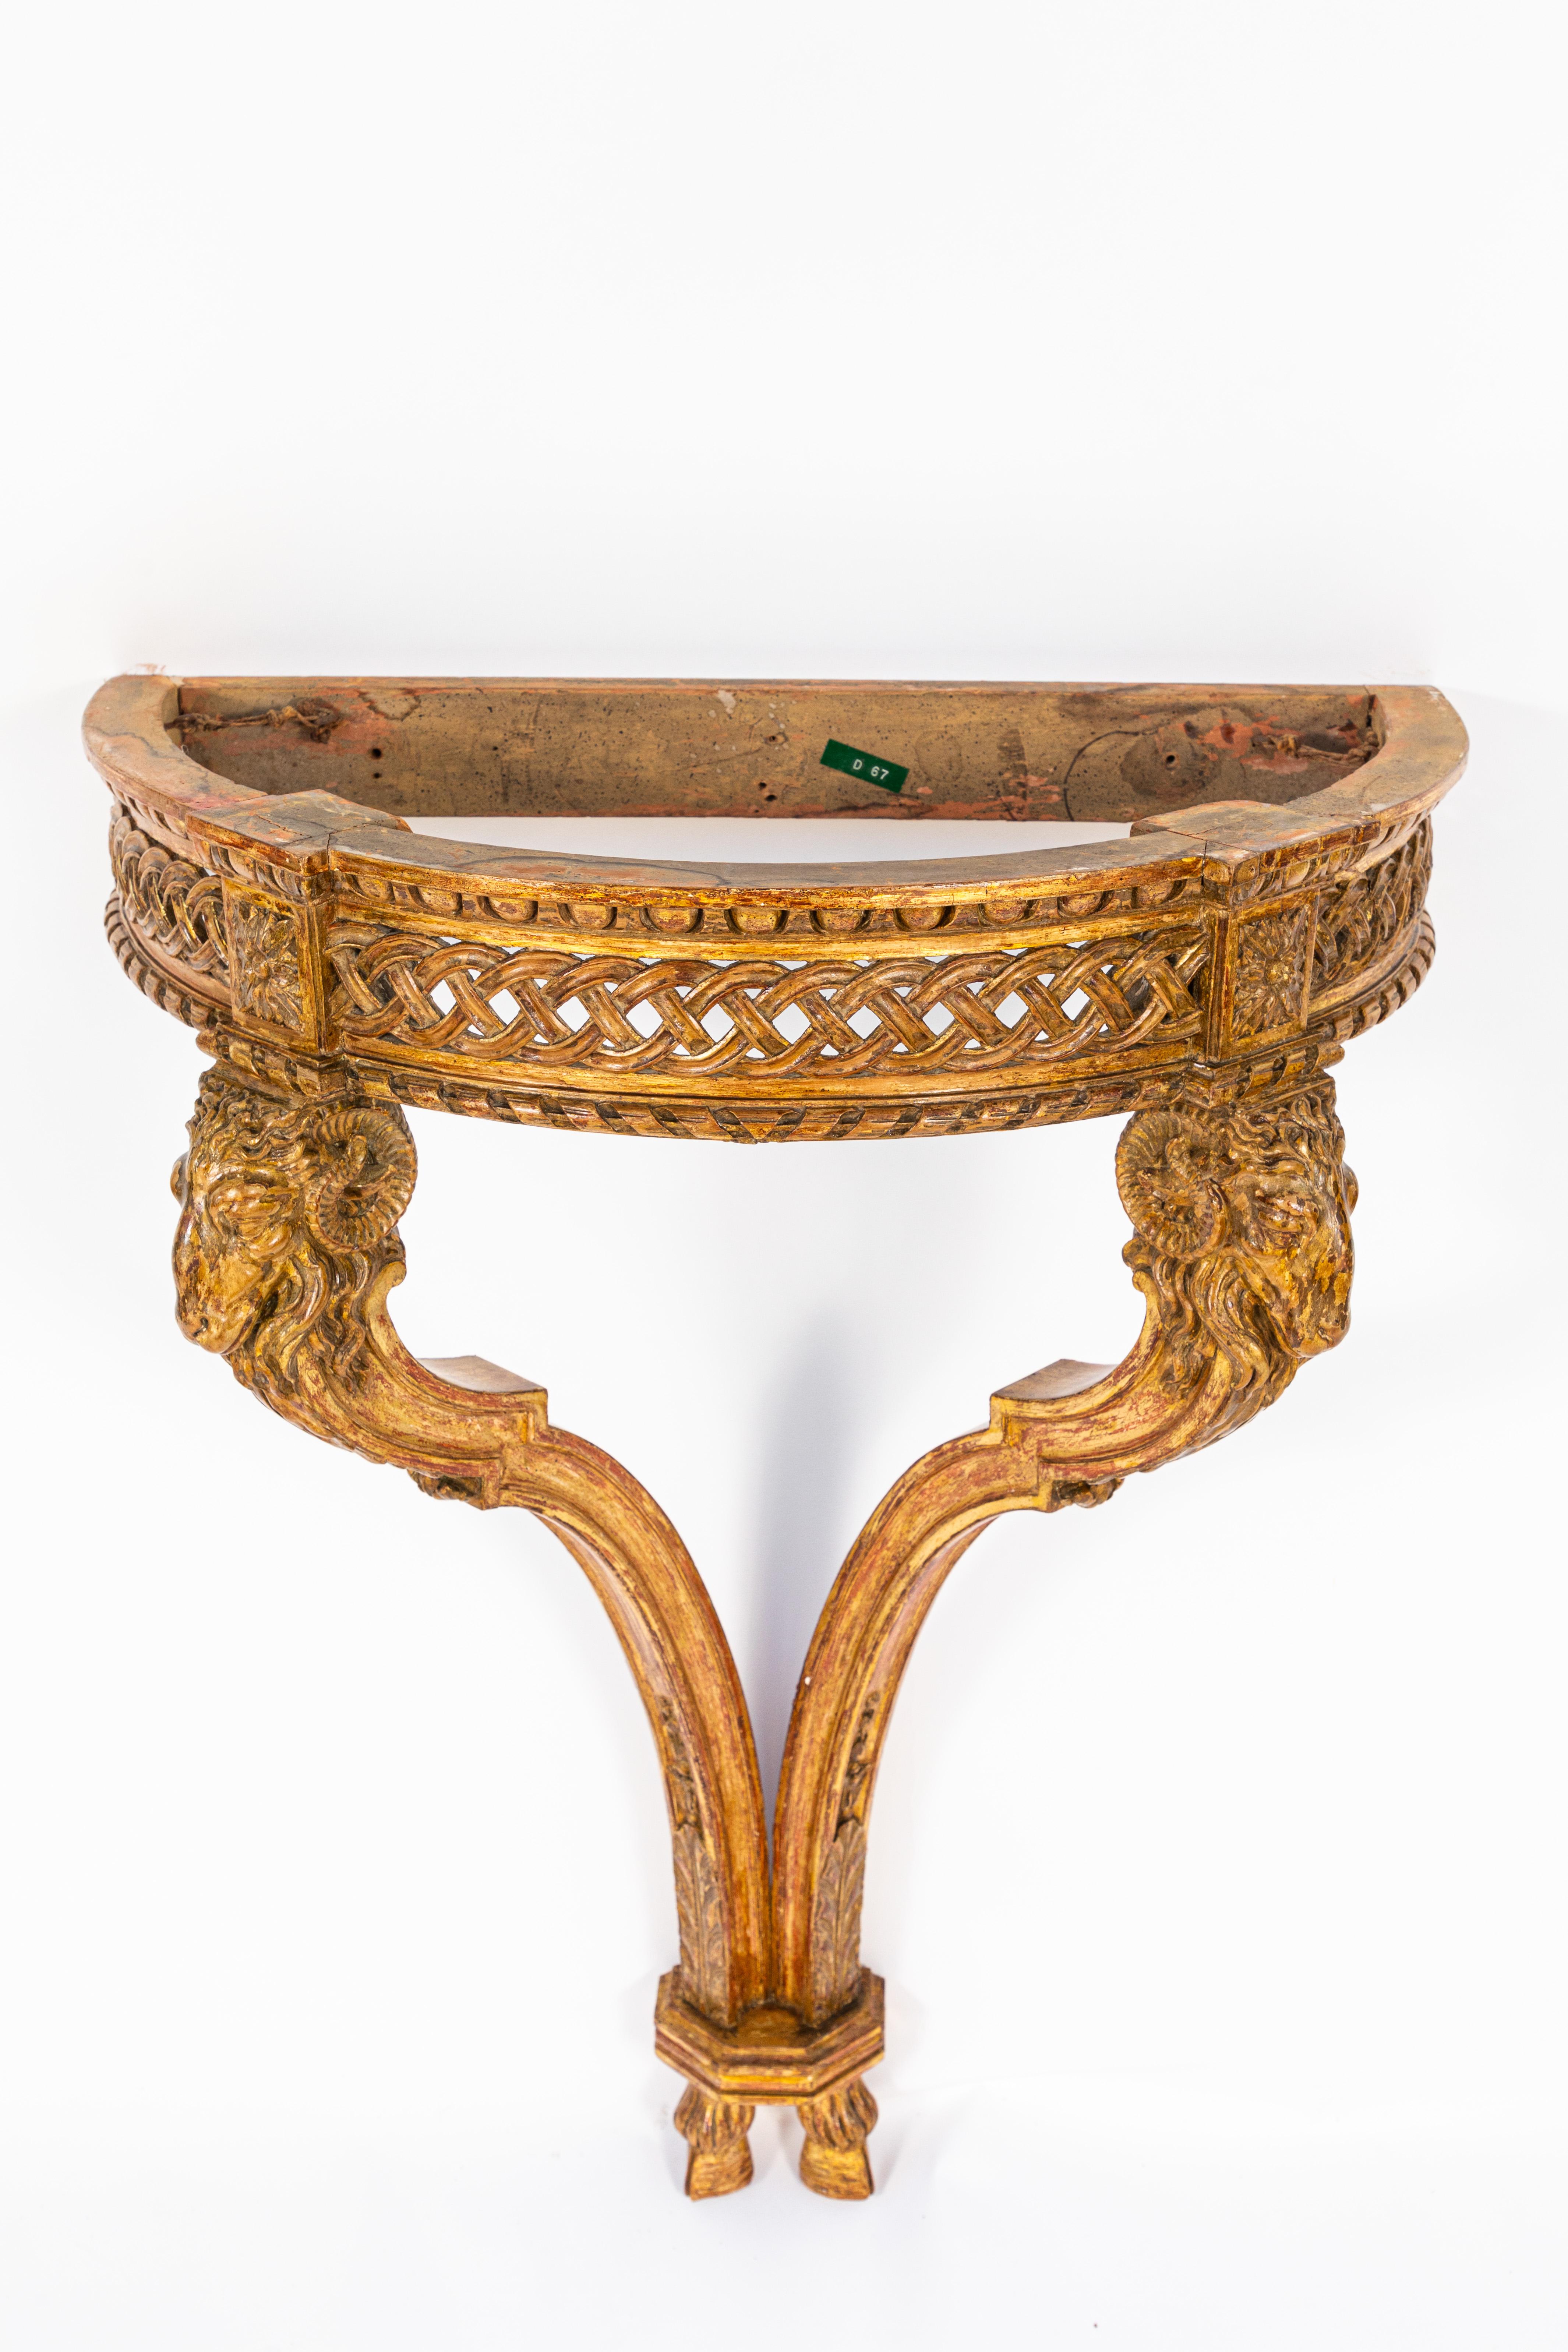 19th century French giltwood wall-mounted console with original marble. Very finely carved with ram's head motif.